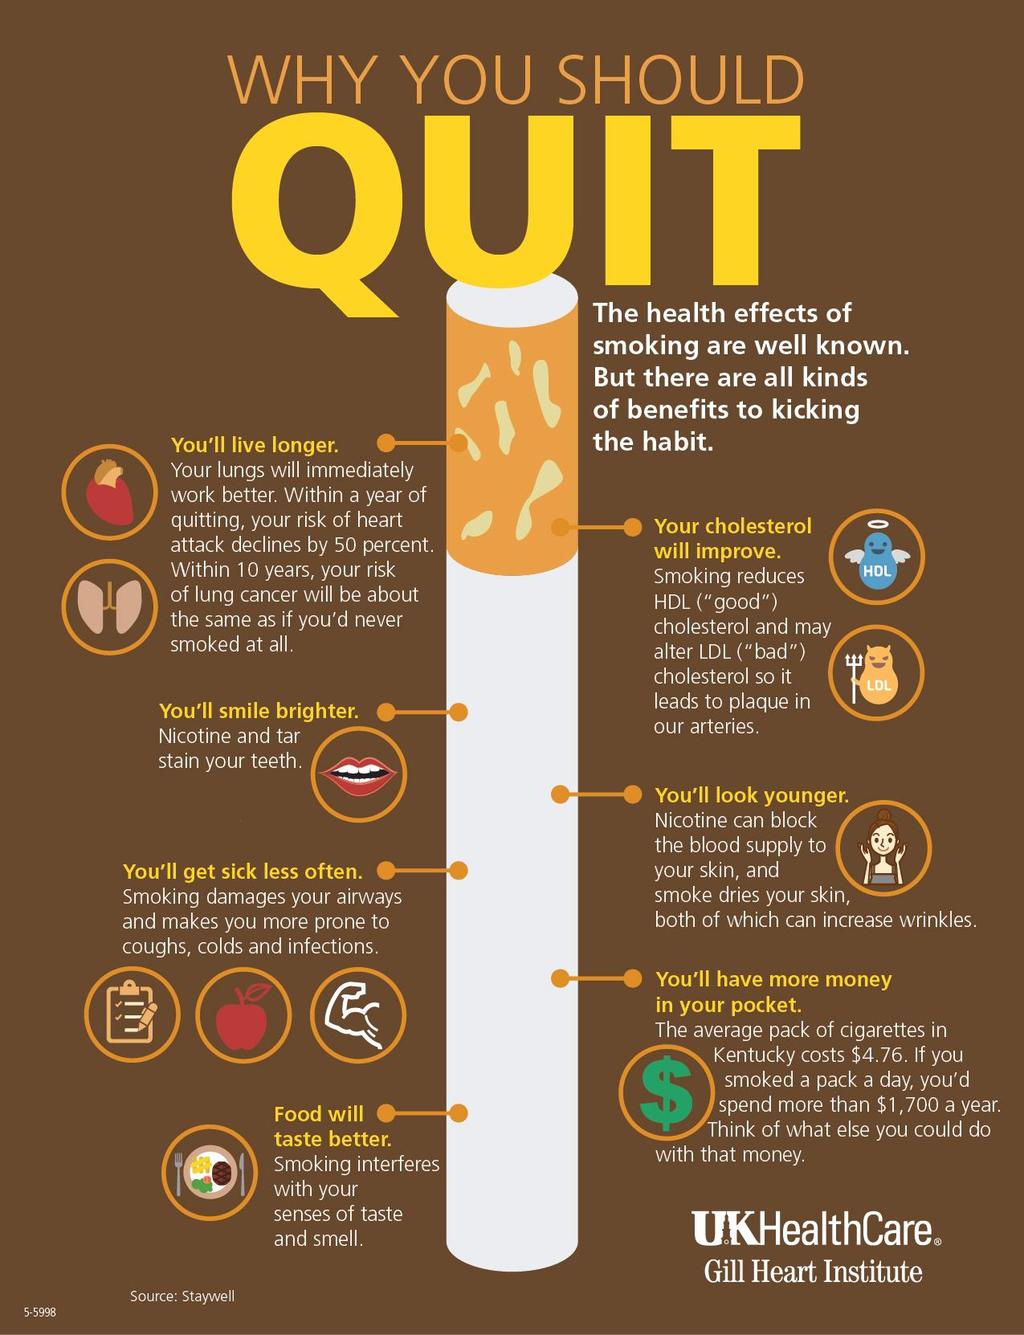 If you have trouble quitting smoking on your own, consider joining a support group.